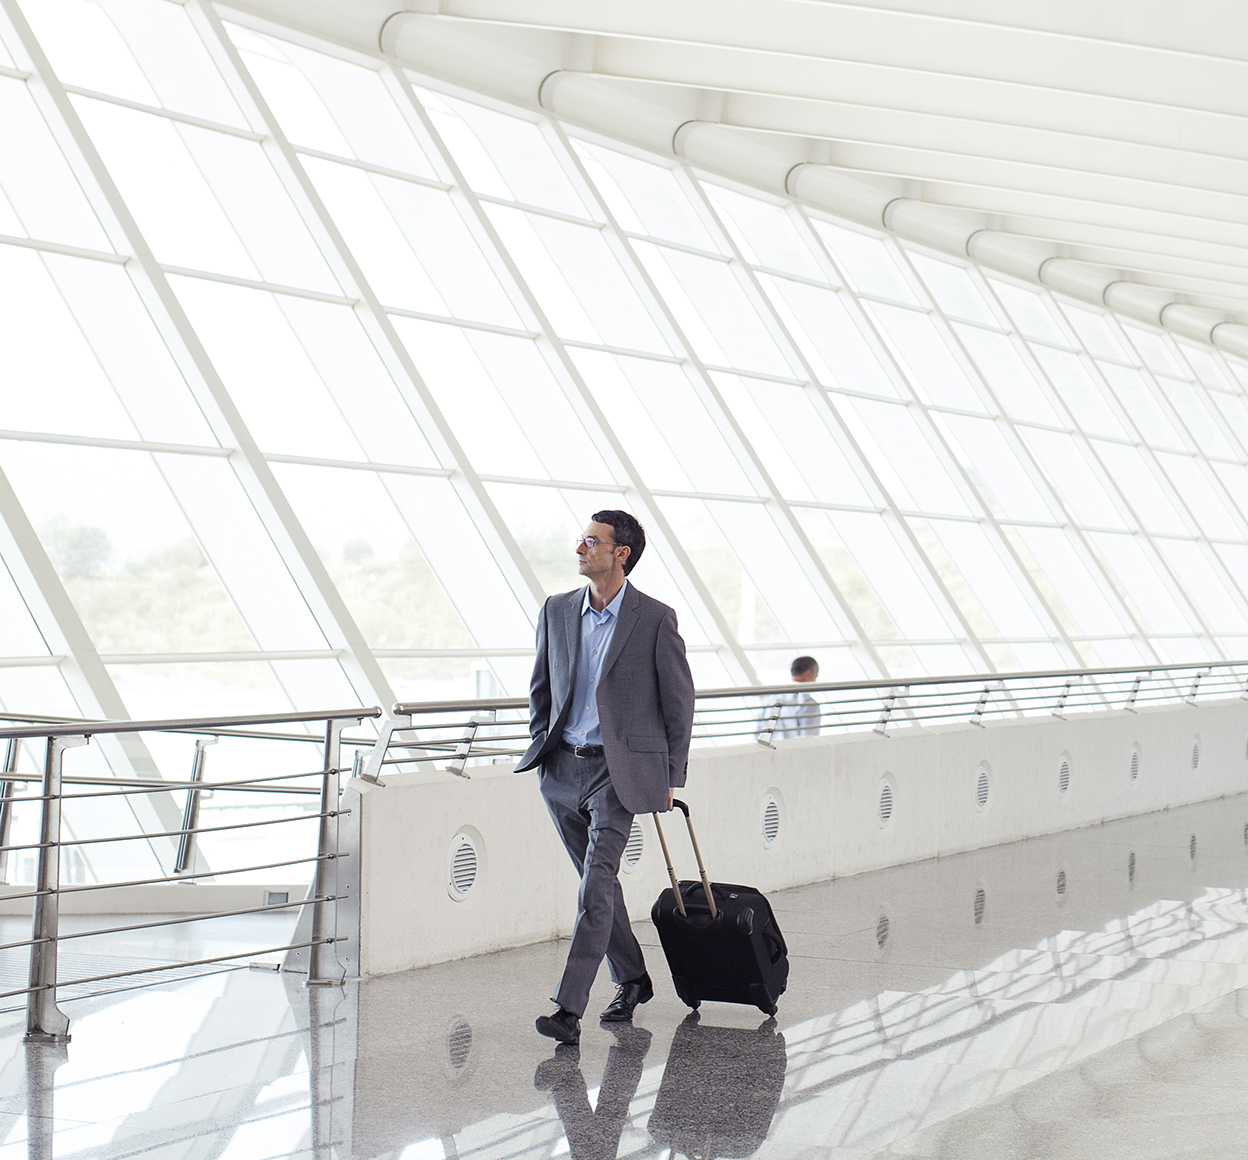 business man walking through an airport with luggage